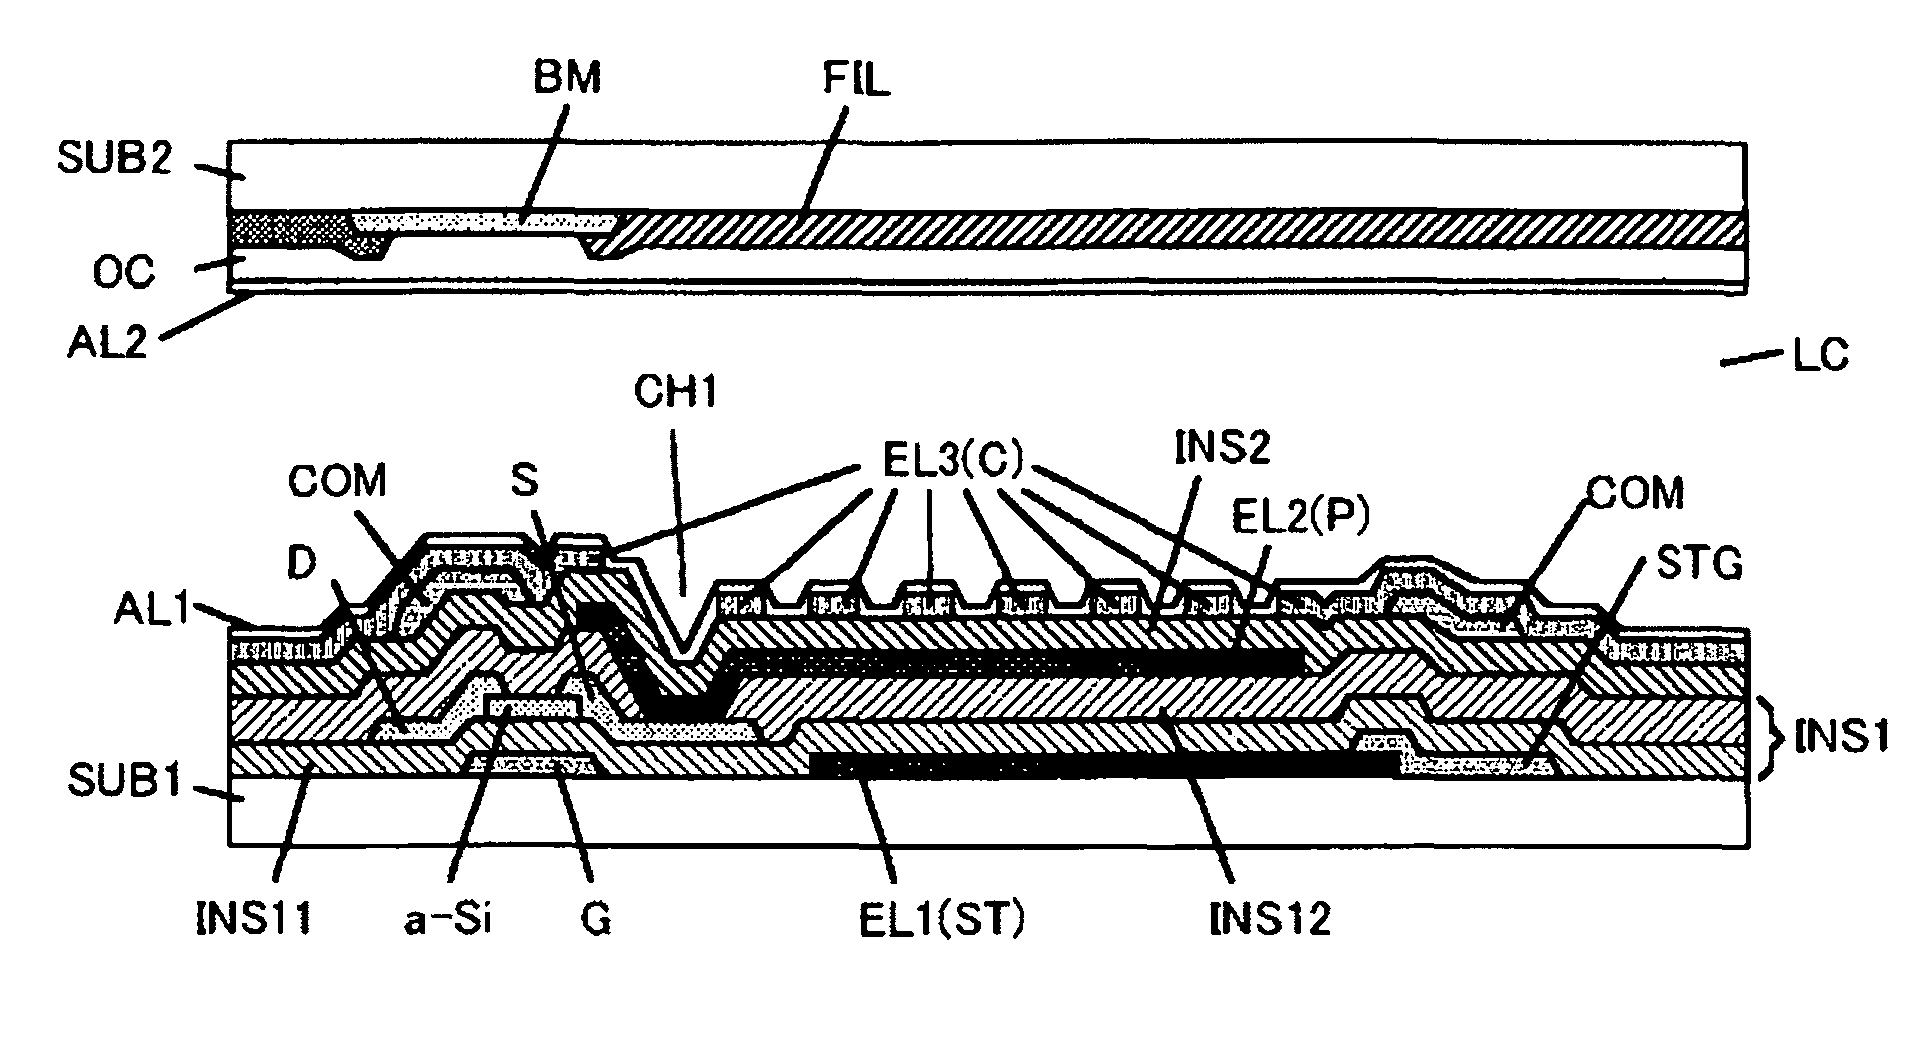 Liquid crystal display device having first, second, and third transparent electrodes that form first and second storage capacitors